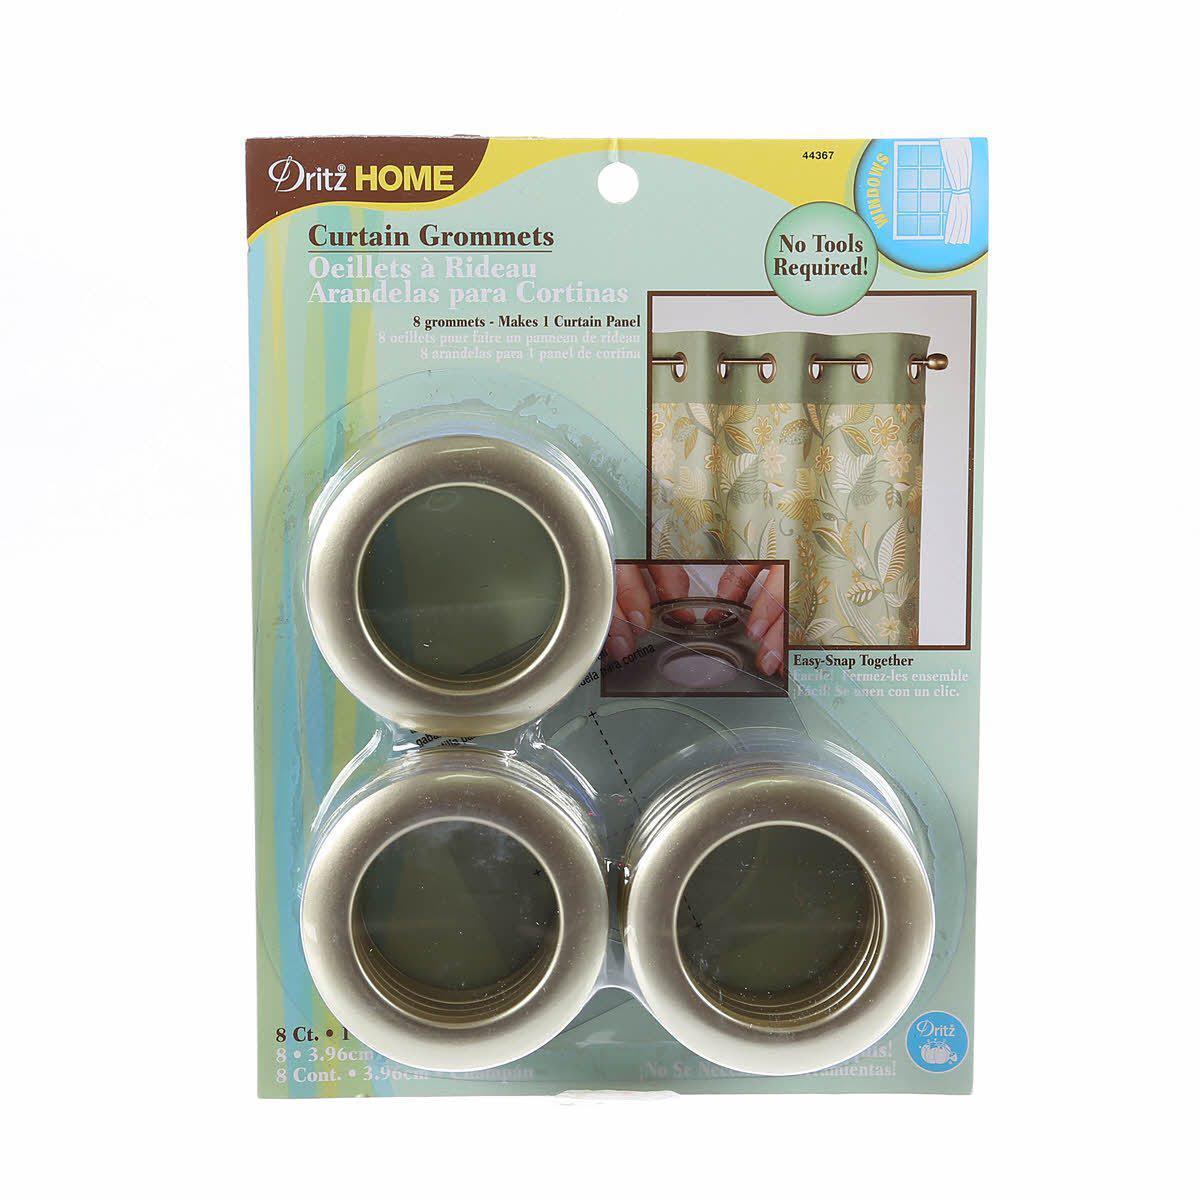 Dritz-Curtain Grommets, Large Champagne, 1-9/16” 8ct.-notion-gather here online